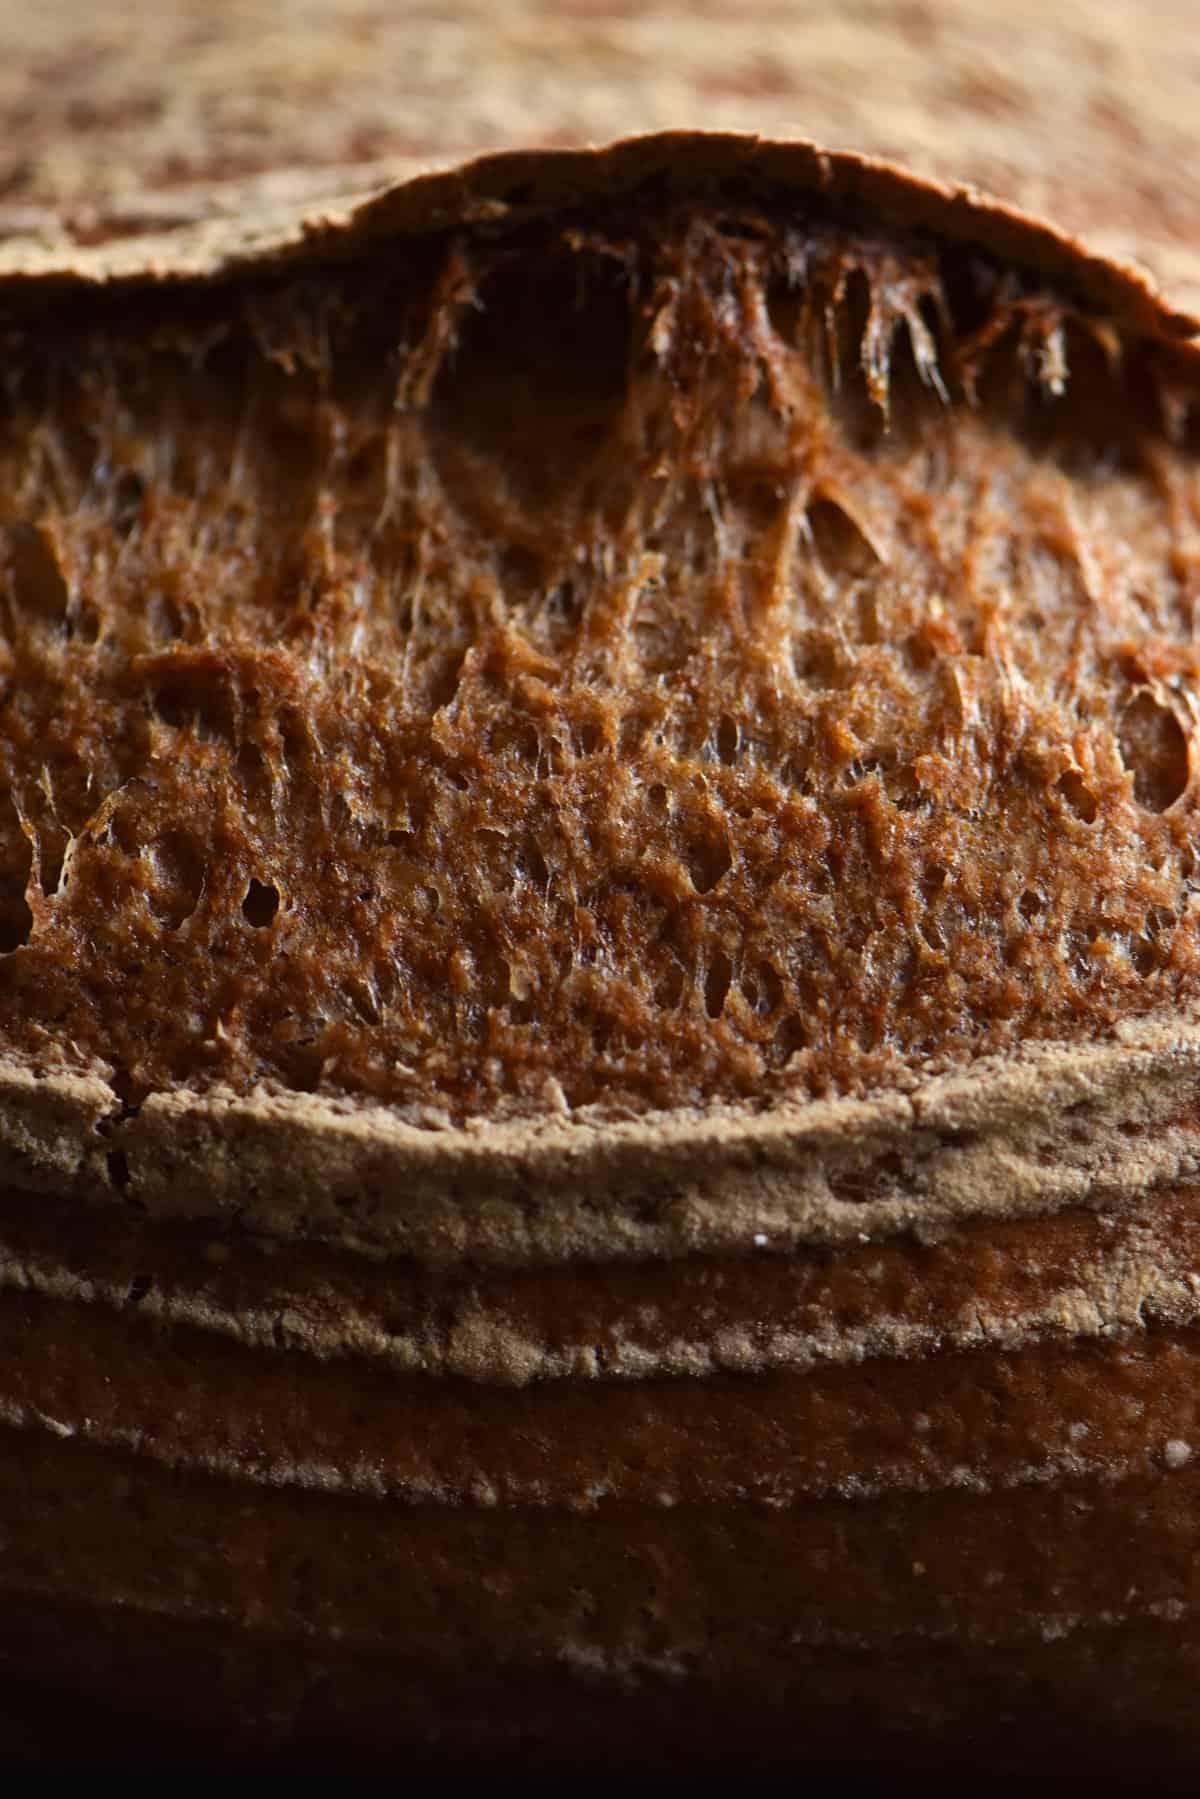 A close up of a loaf of gluten free sourdough bread. The loaf has been scored, exposing a stretchy, golden crust in the eye of the loaf